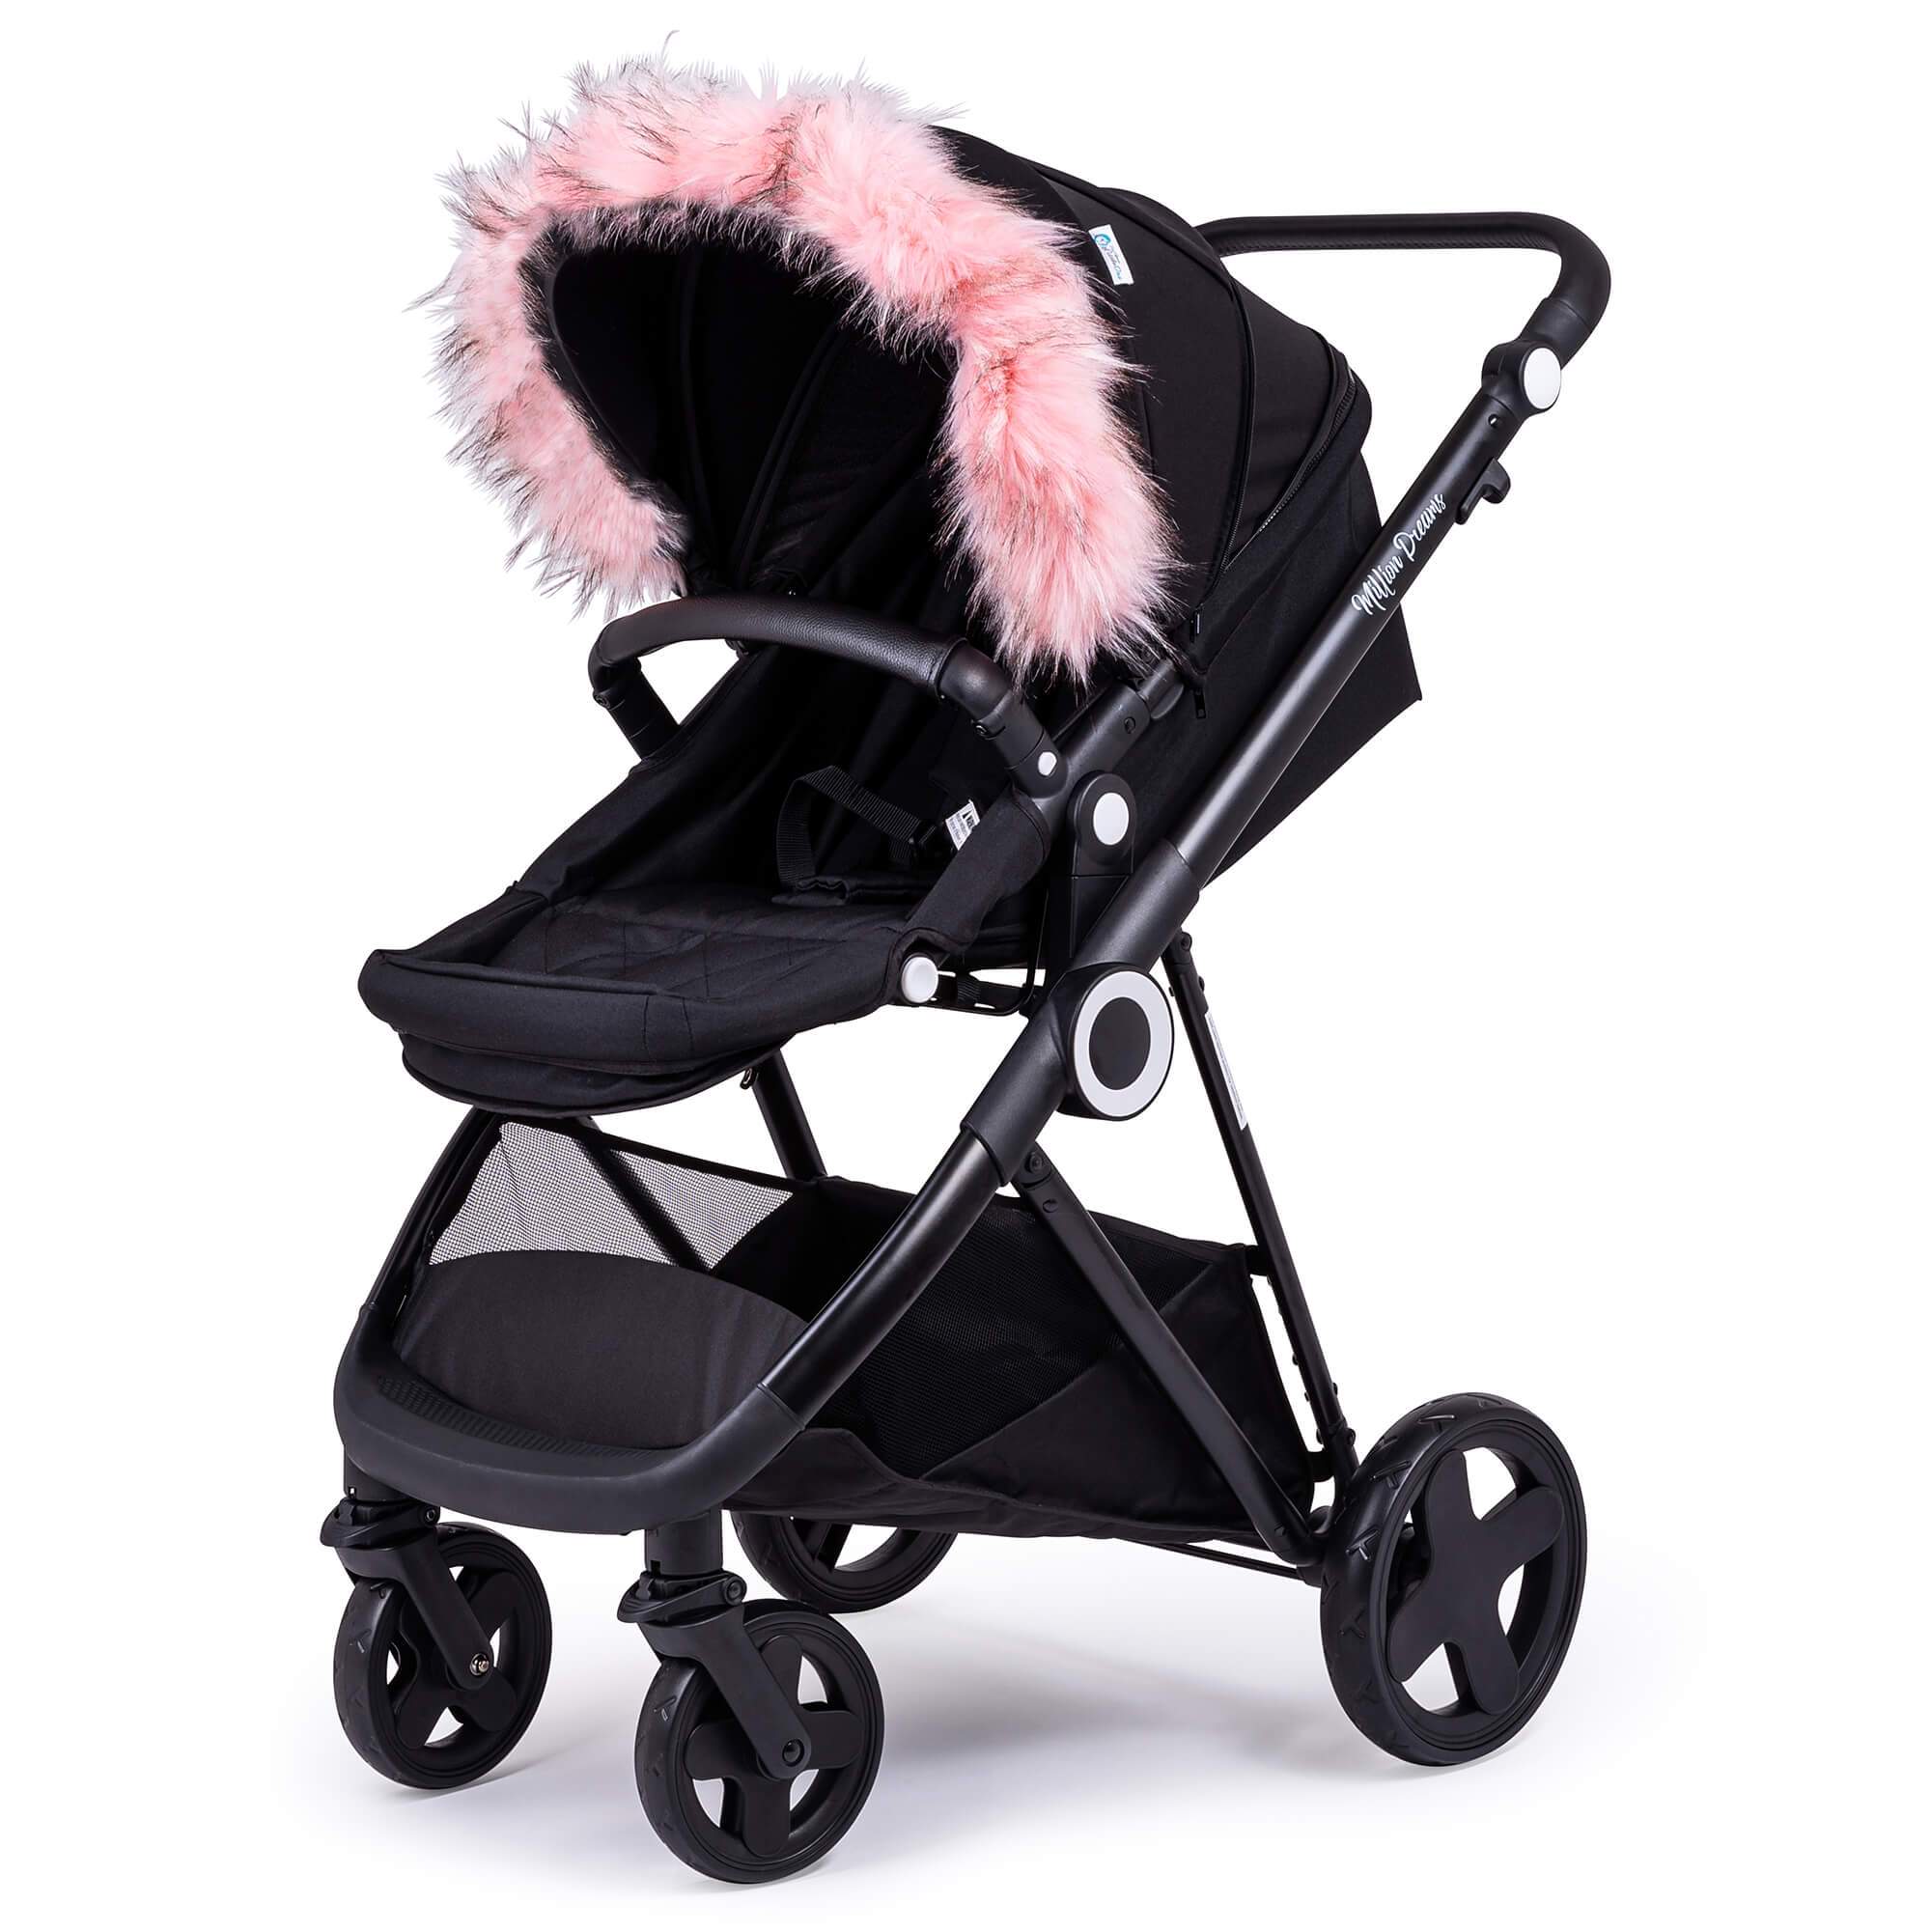 Pram Fur Hood Trim Attachment for Pushchair Compatible with Safety 1st - Light Pink / Fits All Models | For Your Little One